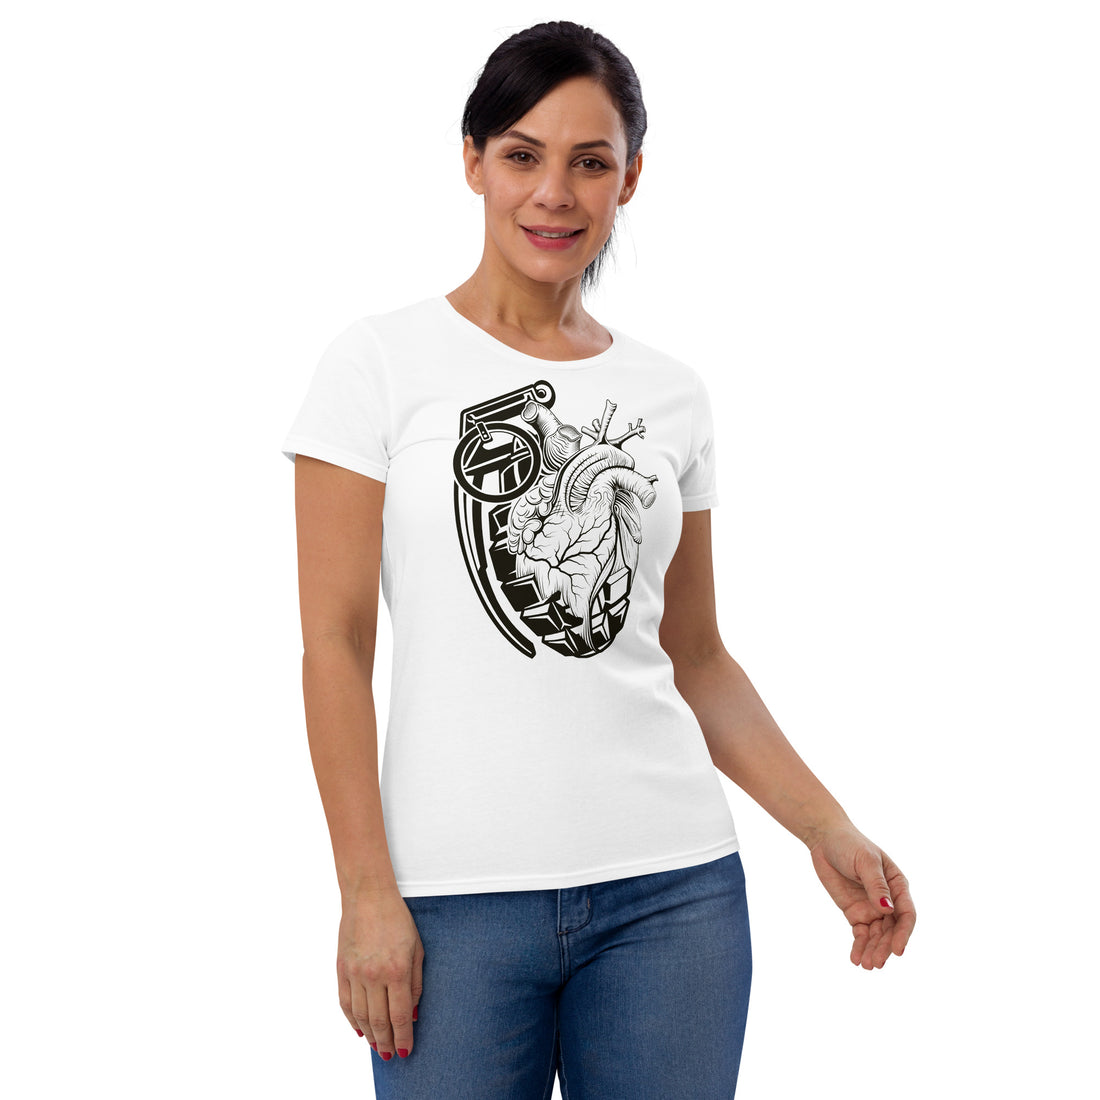 An attractive woman wearing a white t-shirt with a black grenade morphing into an anatomical heart.